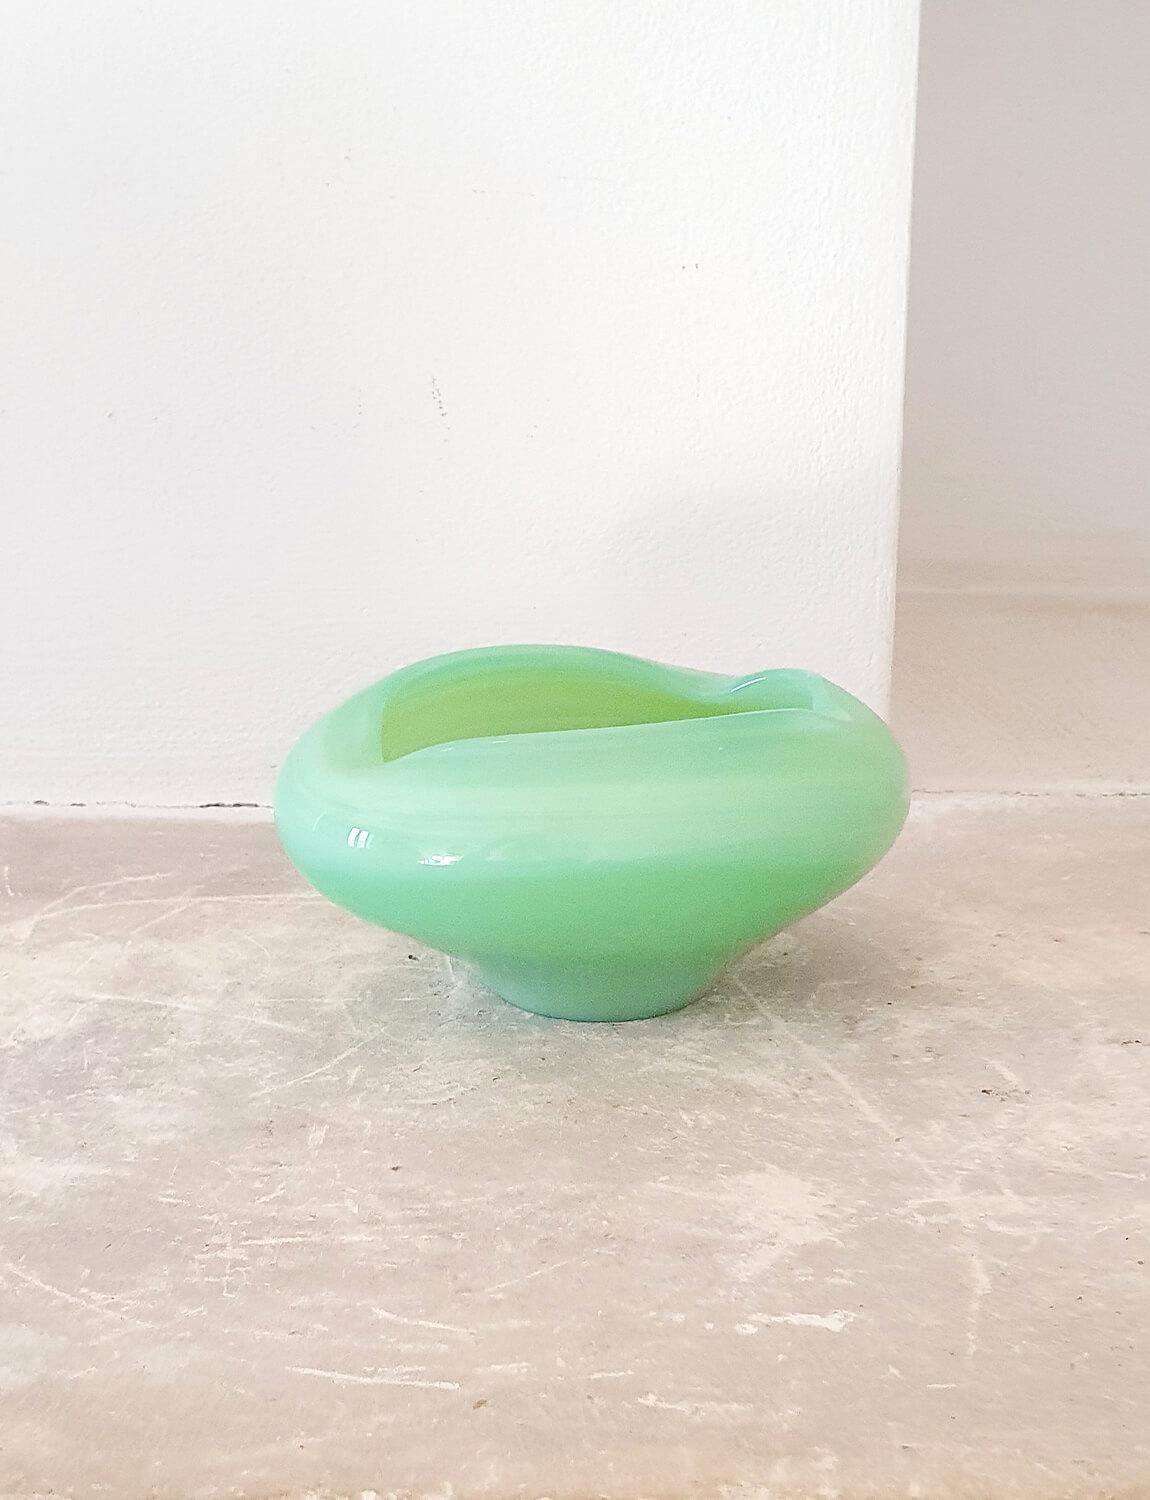 A delightful opaque milky pale green murano glass bowl perfect for coffee table or mantlepiece. This bowl has an organic shape, is an exceptional colour and is in very good condition.

Dimensions: H9cm X W16cm X D13cm